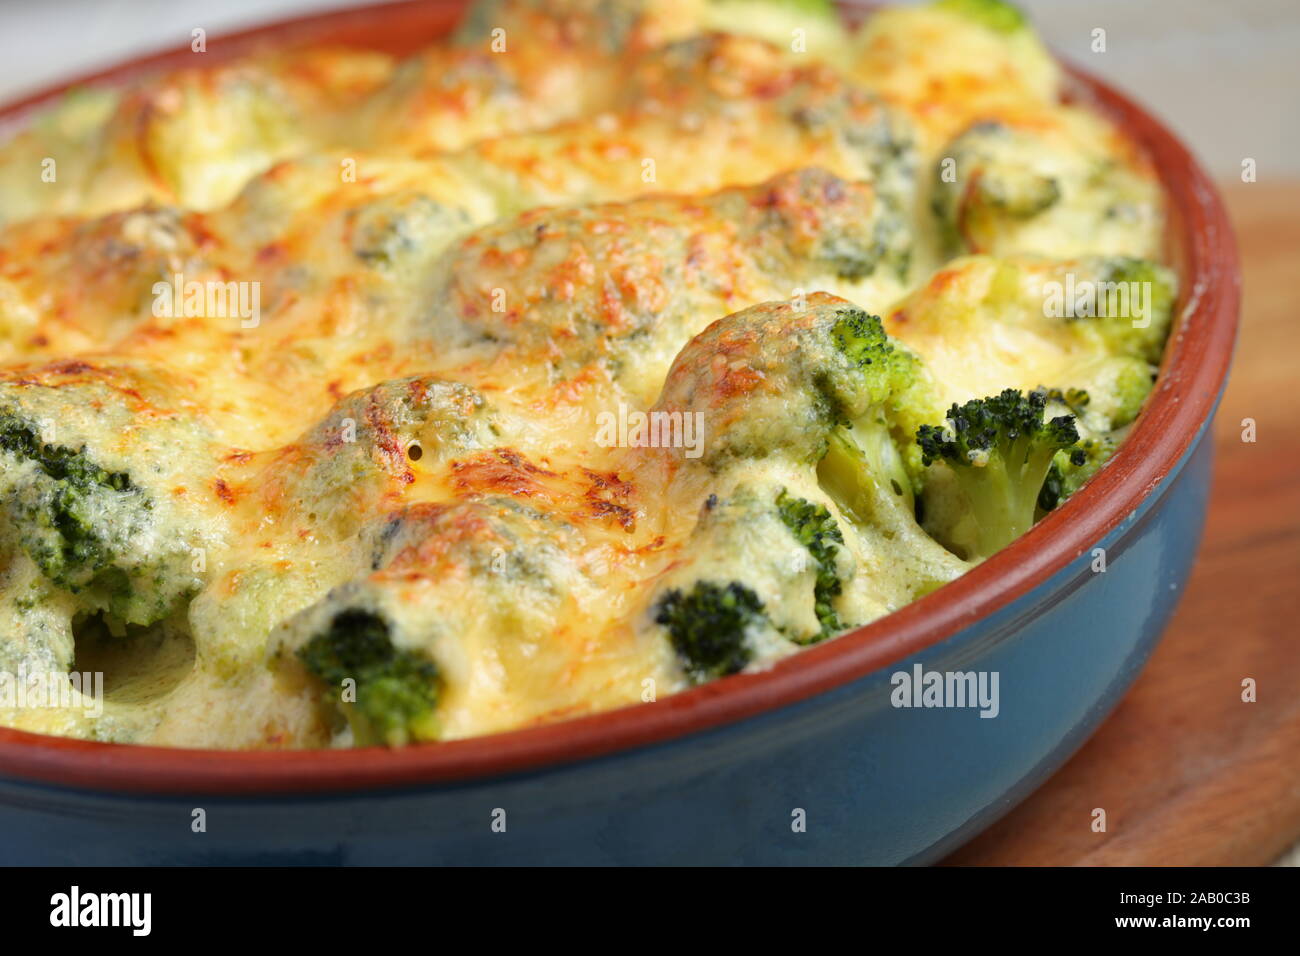 Just baked Broccoli cheese casserole with saffron in a baking dish Stock Photo